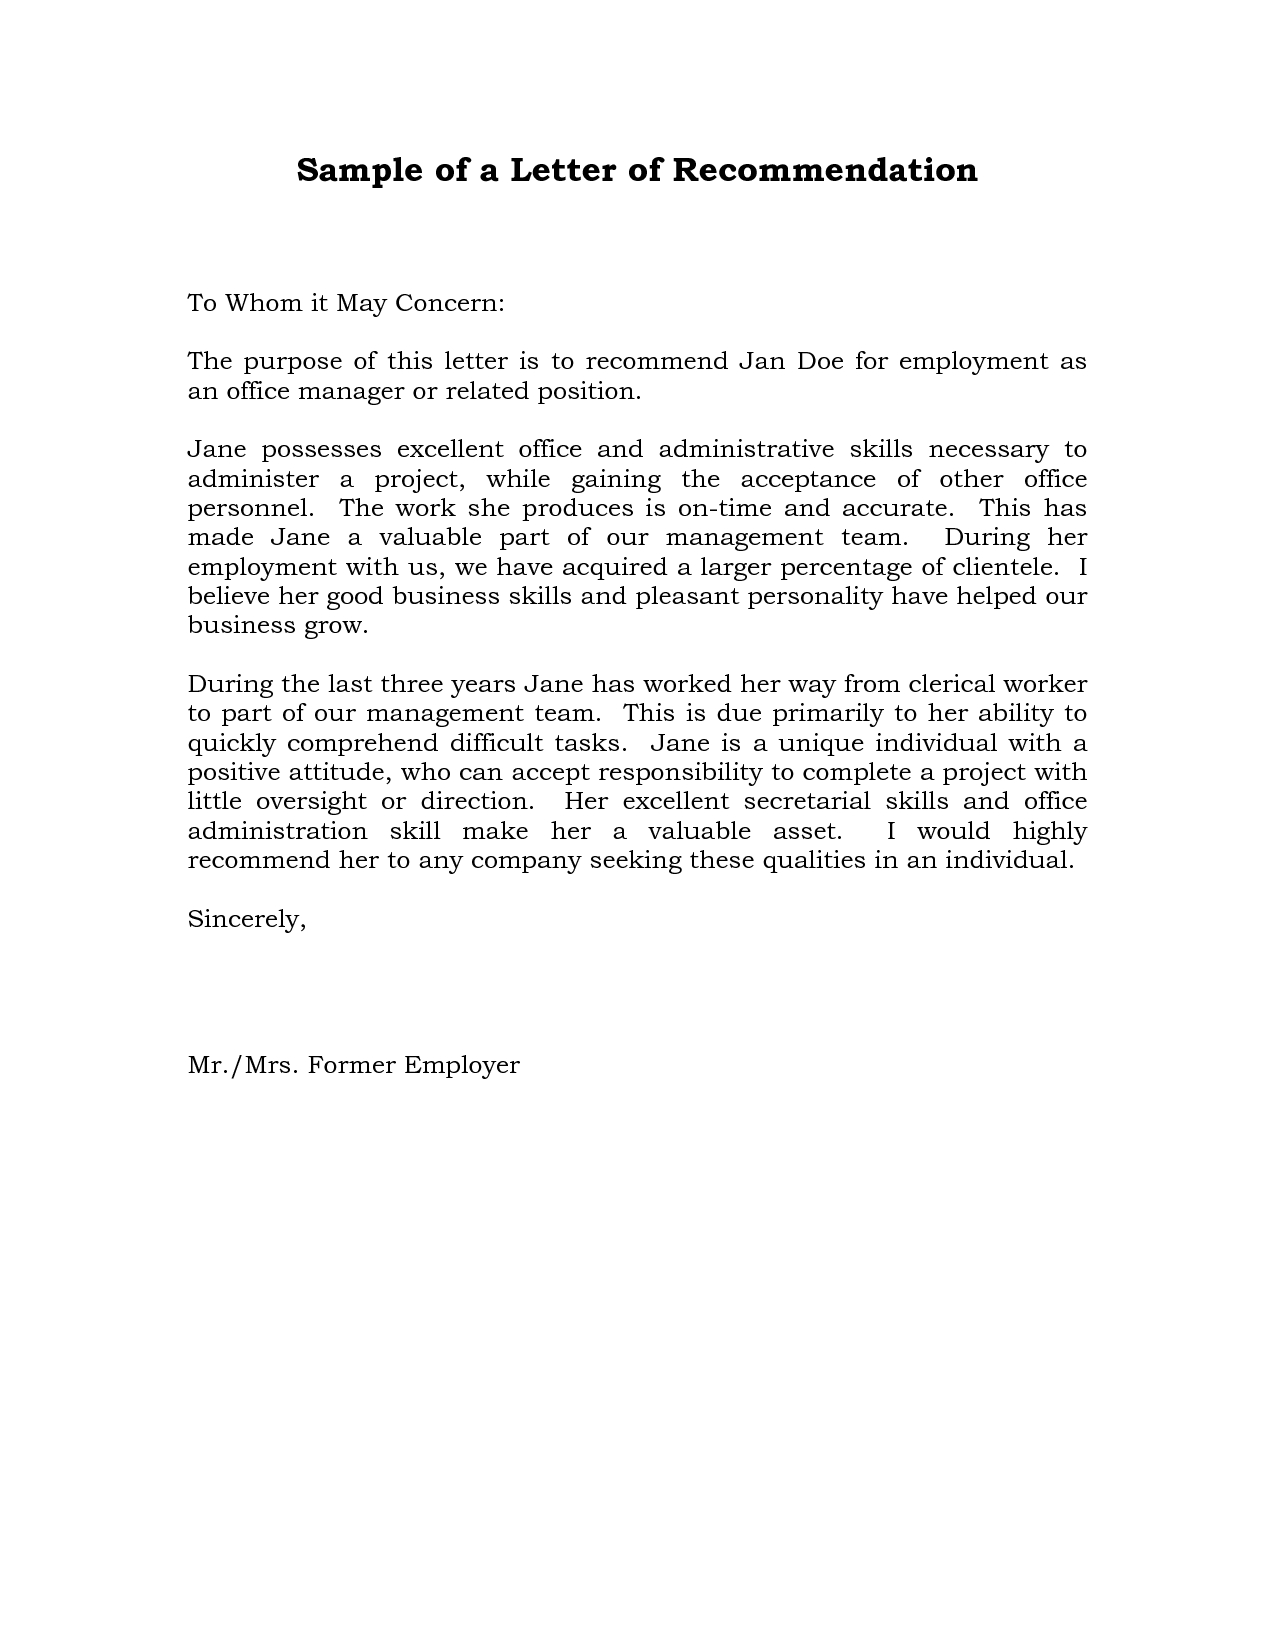 Reference Letter Of Recommendation Sample Sample Manager intended for dimensions 1275 X 1650